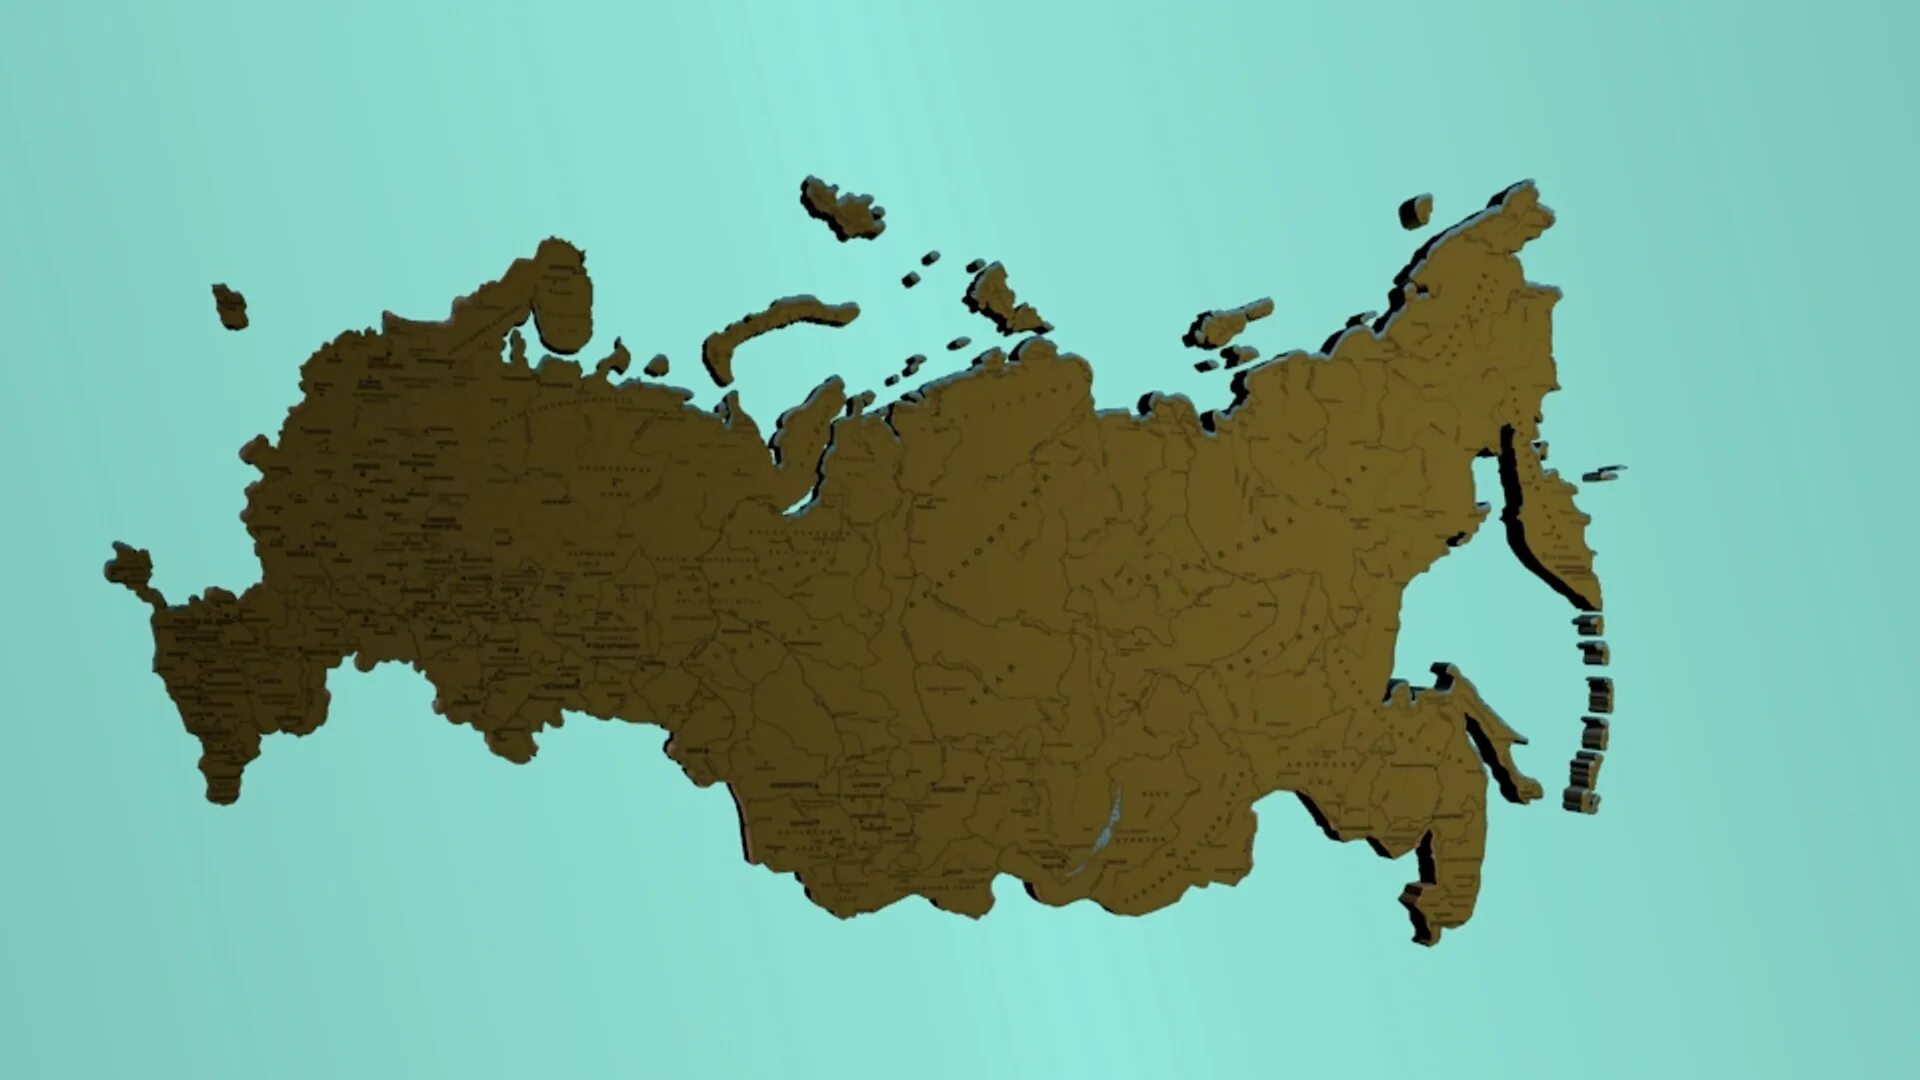 Total area of the russian federation. Карта России. Карта России 3d. Россия 3d модель. Карта России 3d модель.